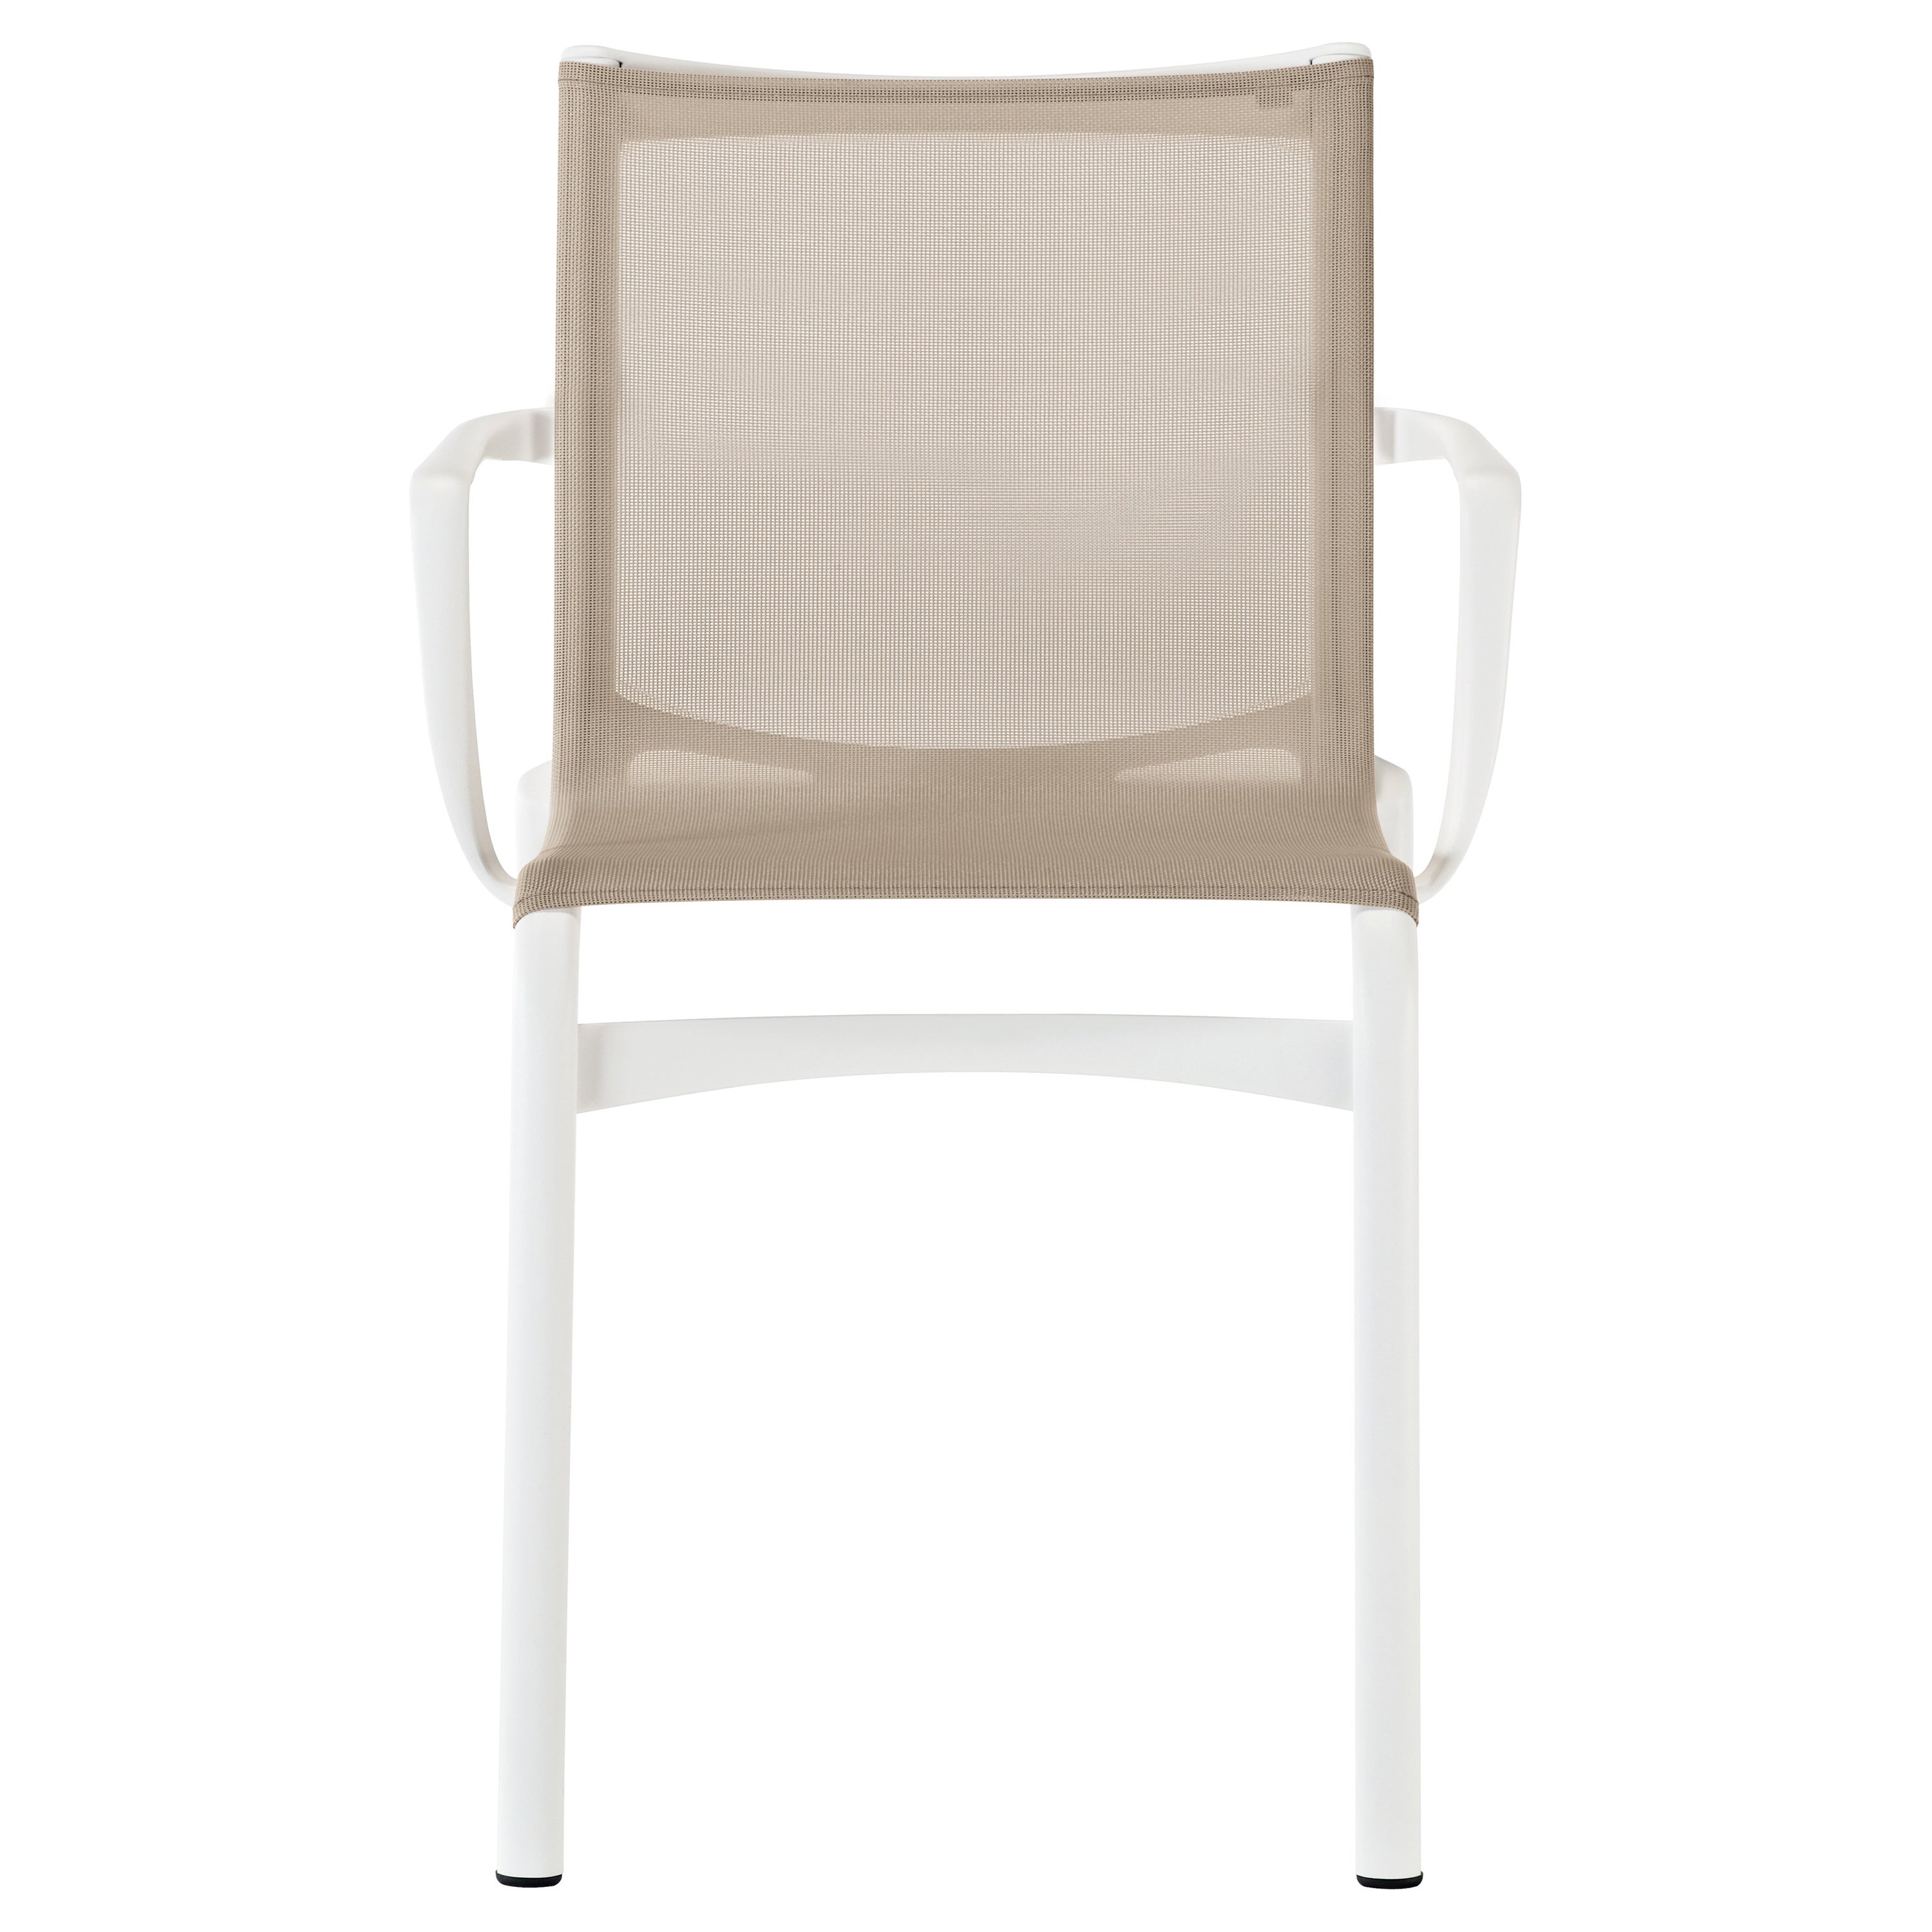 Alias Bigframe 44 Outdoor Armchair in Sand Mesh with Lacquered Aluminium Frame For Sale